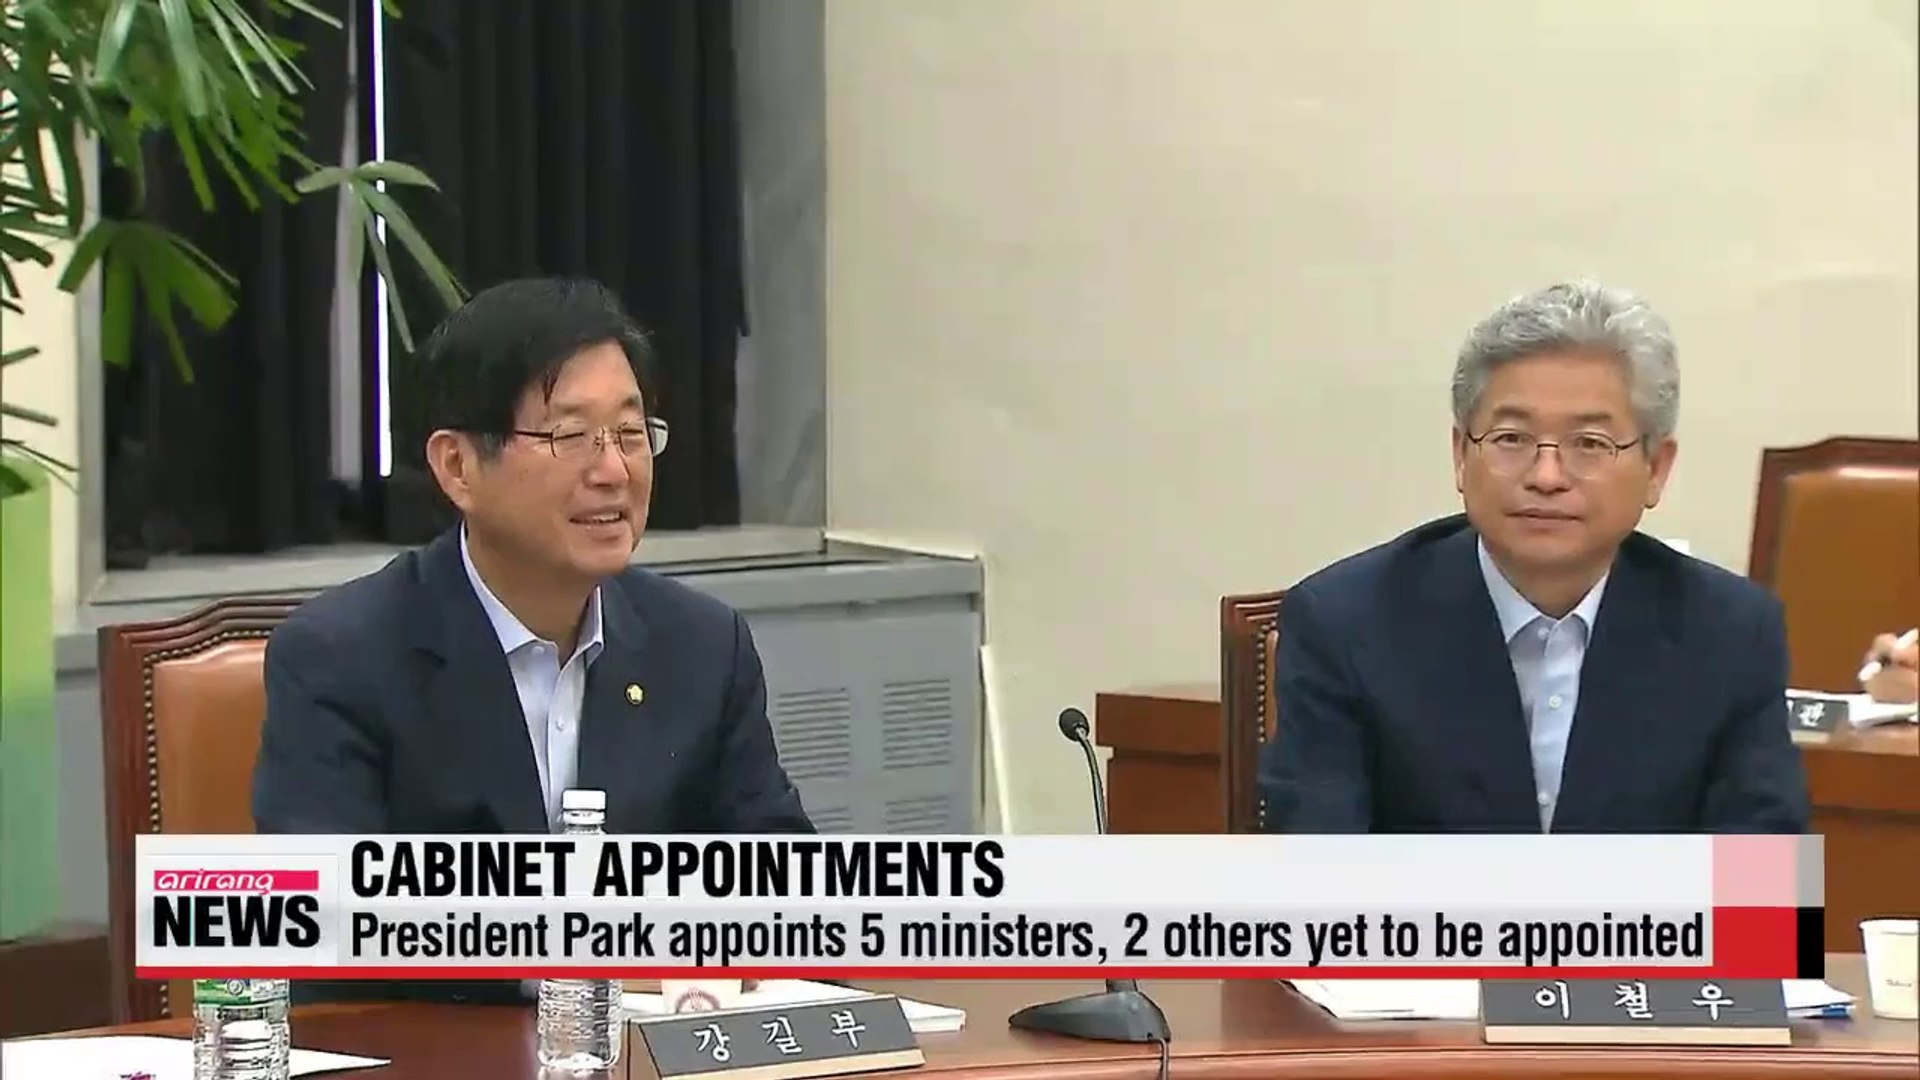 President Park Appoints Five Cabinet Ministers Two Others Yet To